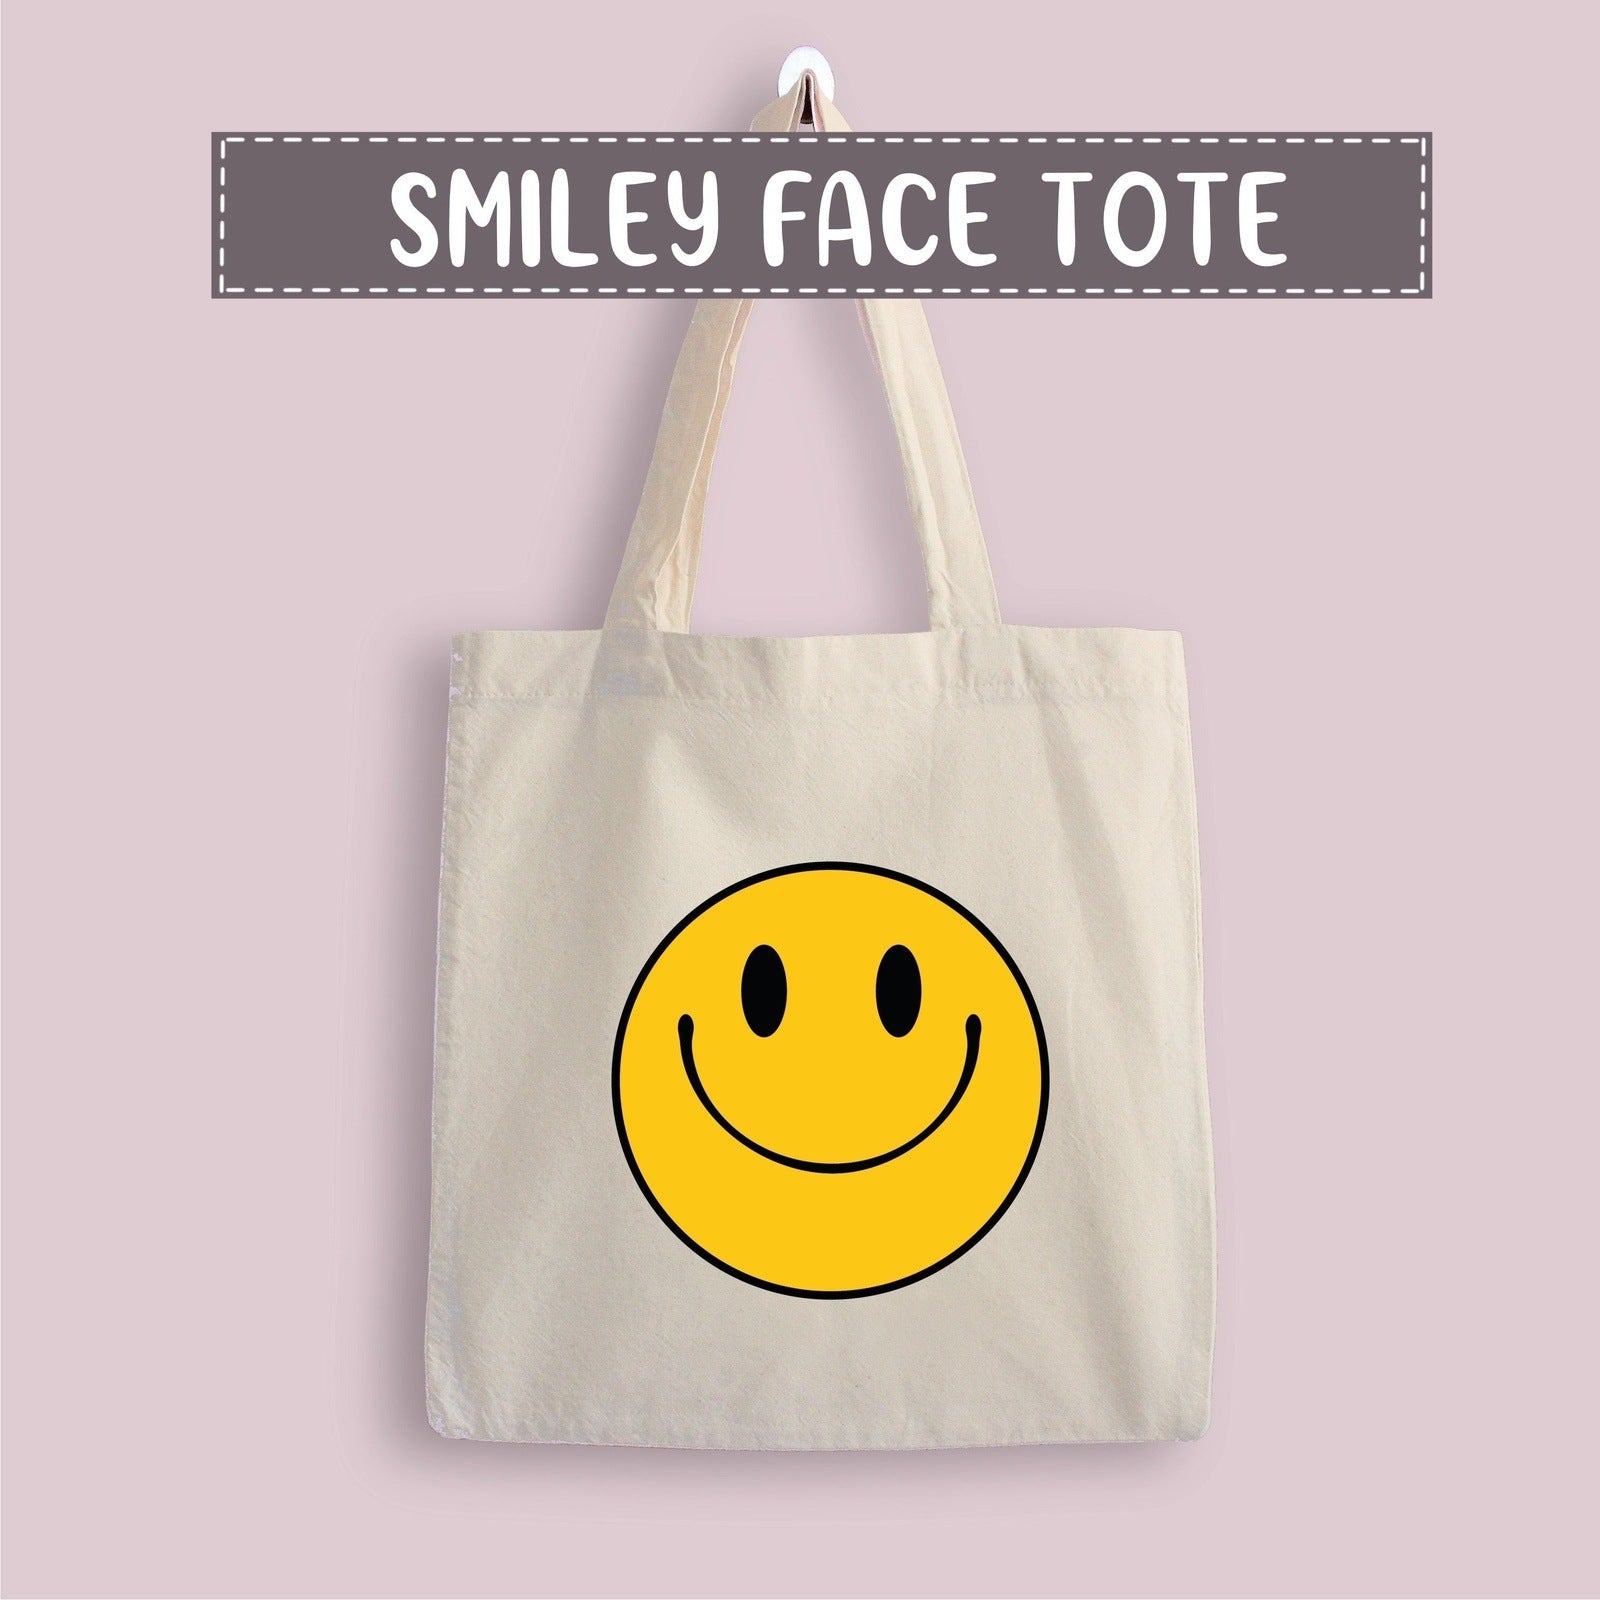 Melting Smiley Face Tote Bag, Keep on Smiling, Retro '90's Y2K Smiley Face  Everyday Tote Bag, Trippy Dripping Happy Face Reusable shopping